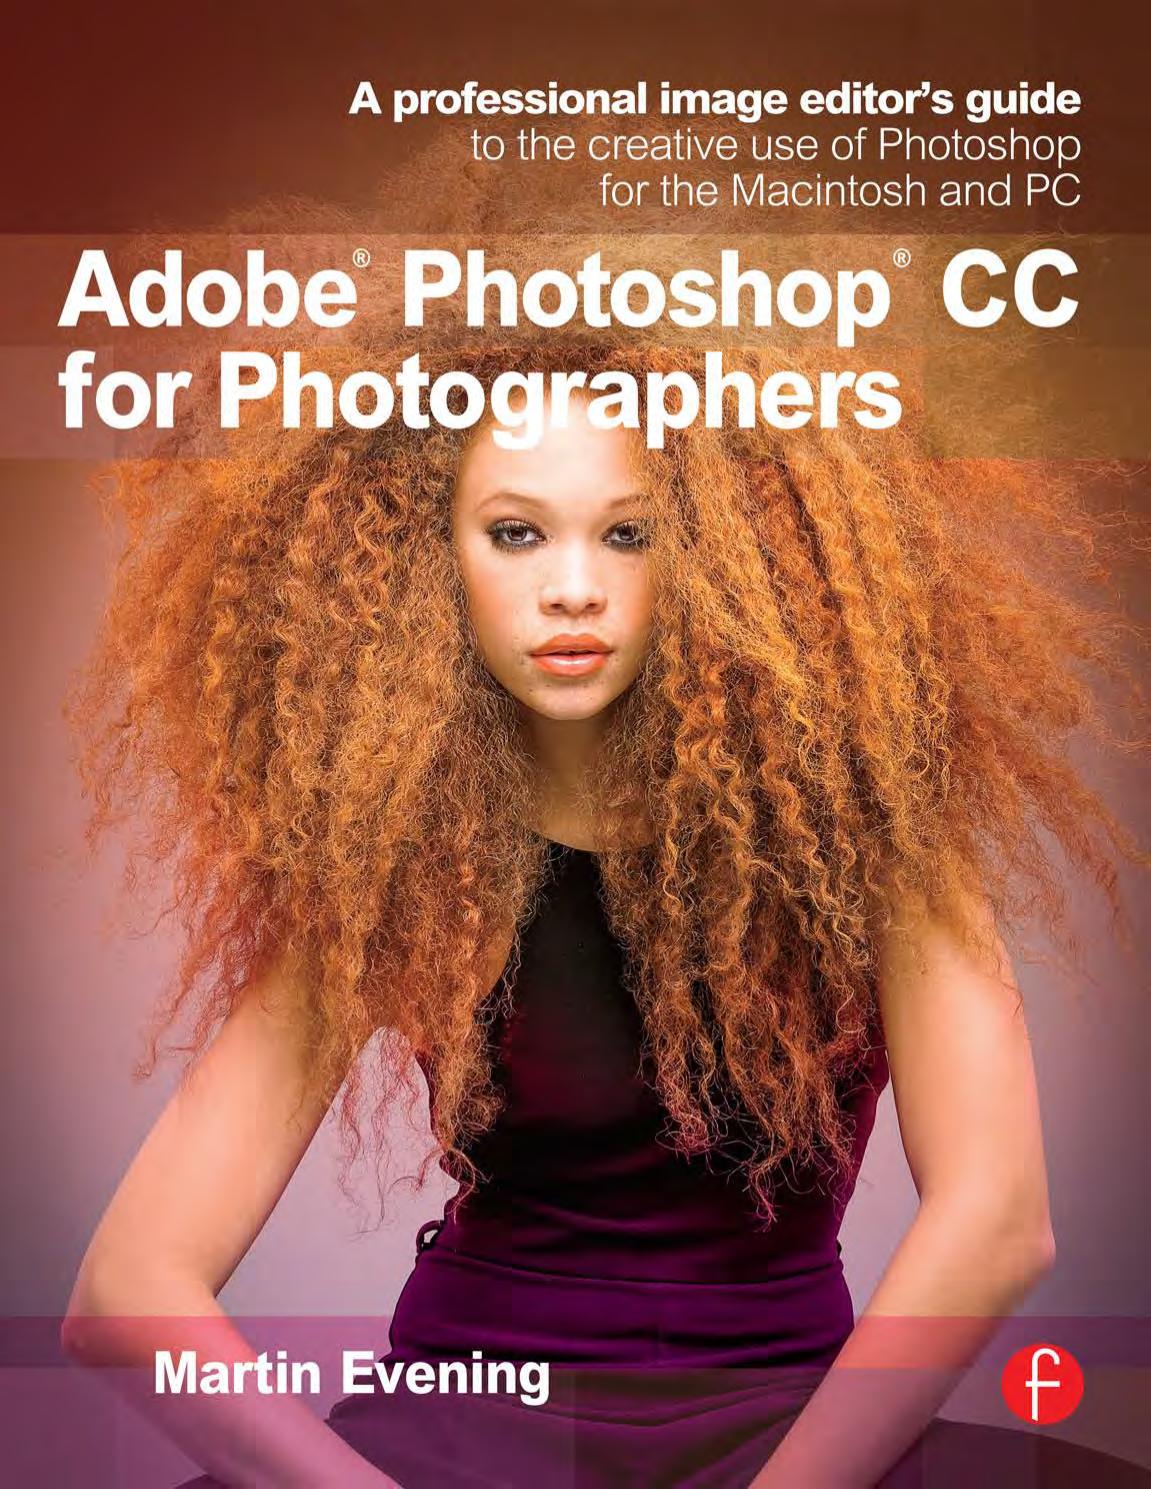 Adobe Photoshop CC for Photographers by Martin Evening